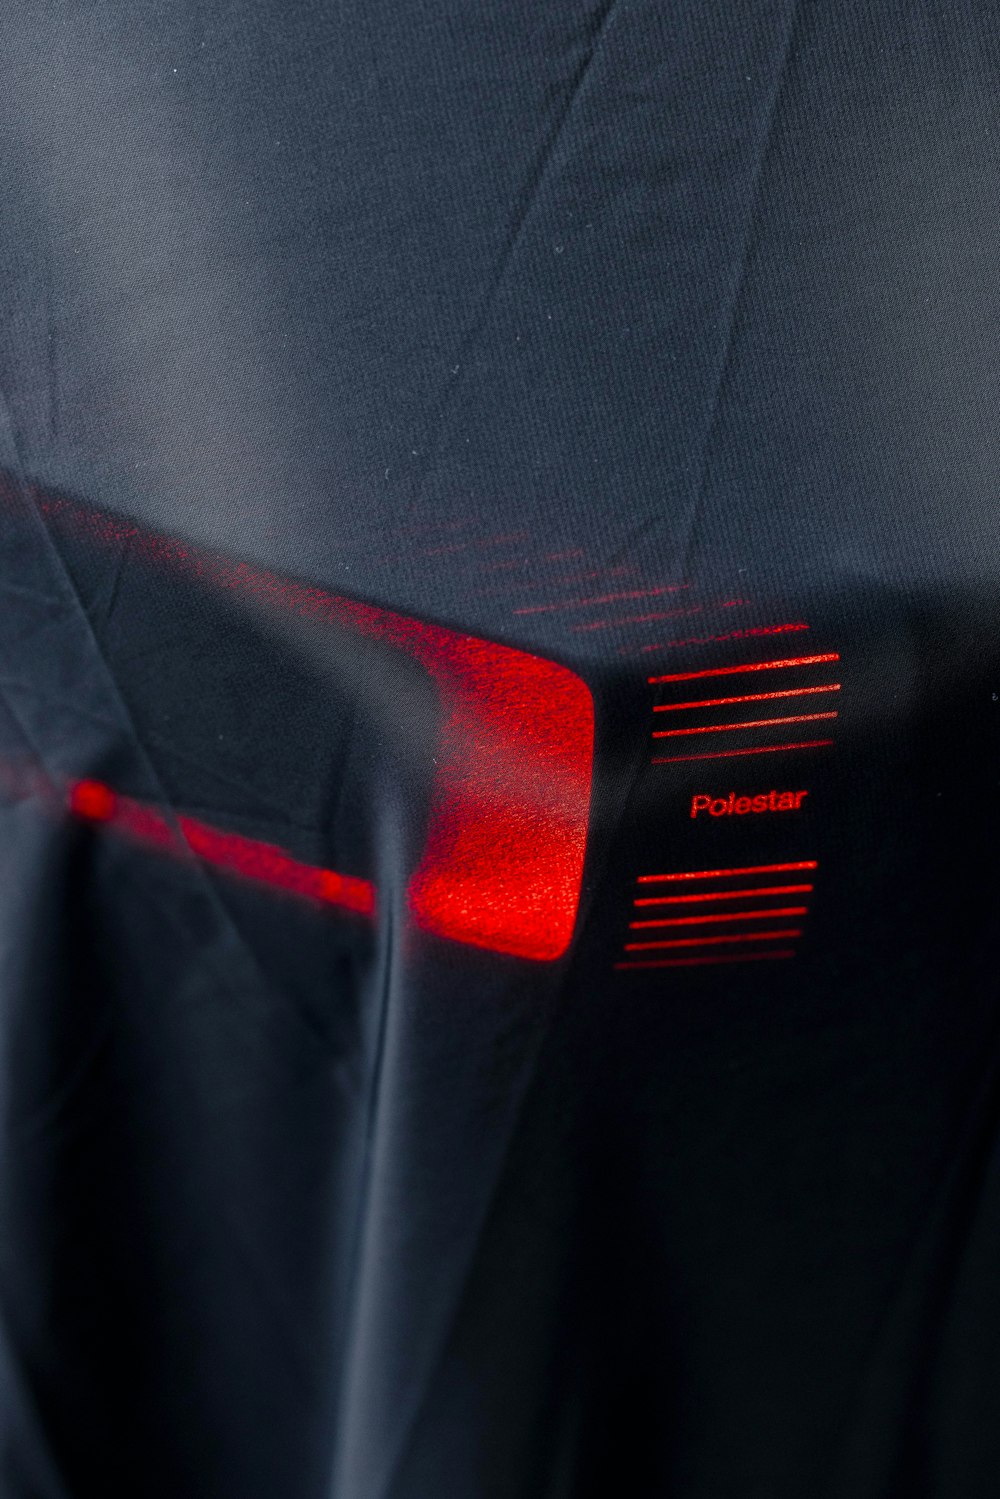 a close up of a black cloth with a red light on it